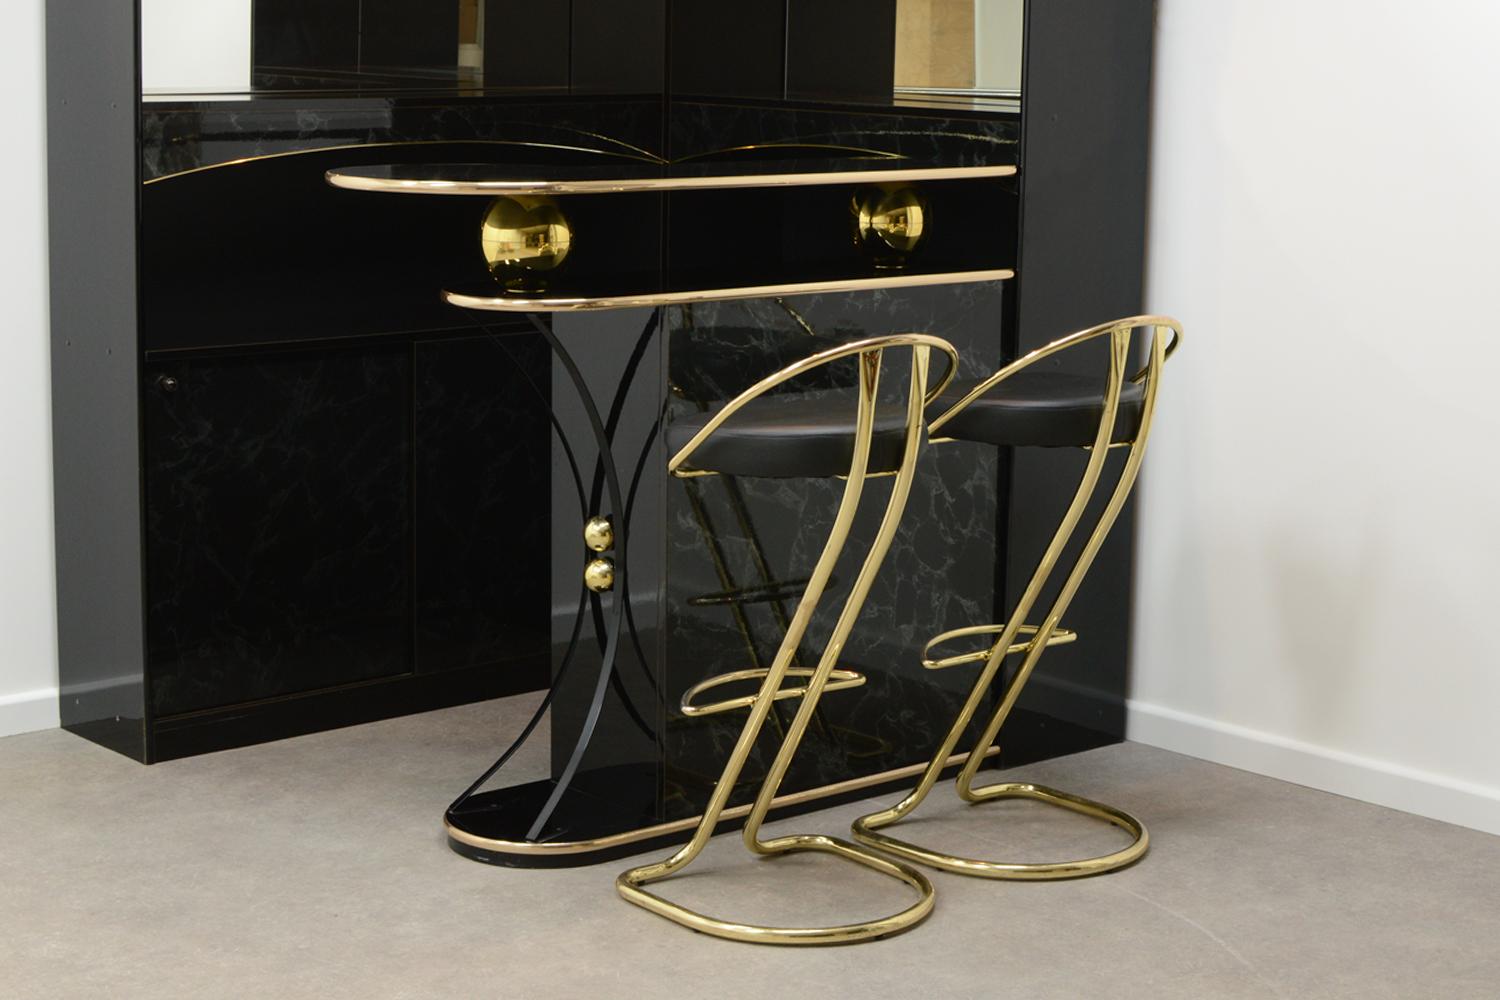 80’s Hollywood regency style home cocktail bar, made in Italy. Gloss black with imitation marble and gold. 2 mirrors, glass shelving, lighting, wine glass hooks and lots of storage. Including 2 bar stools. In good vintage condition. Price for the